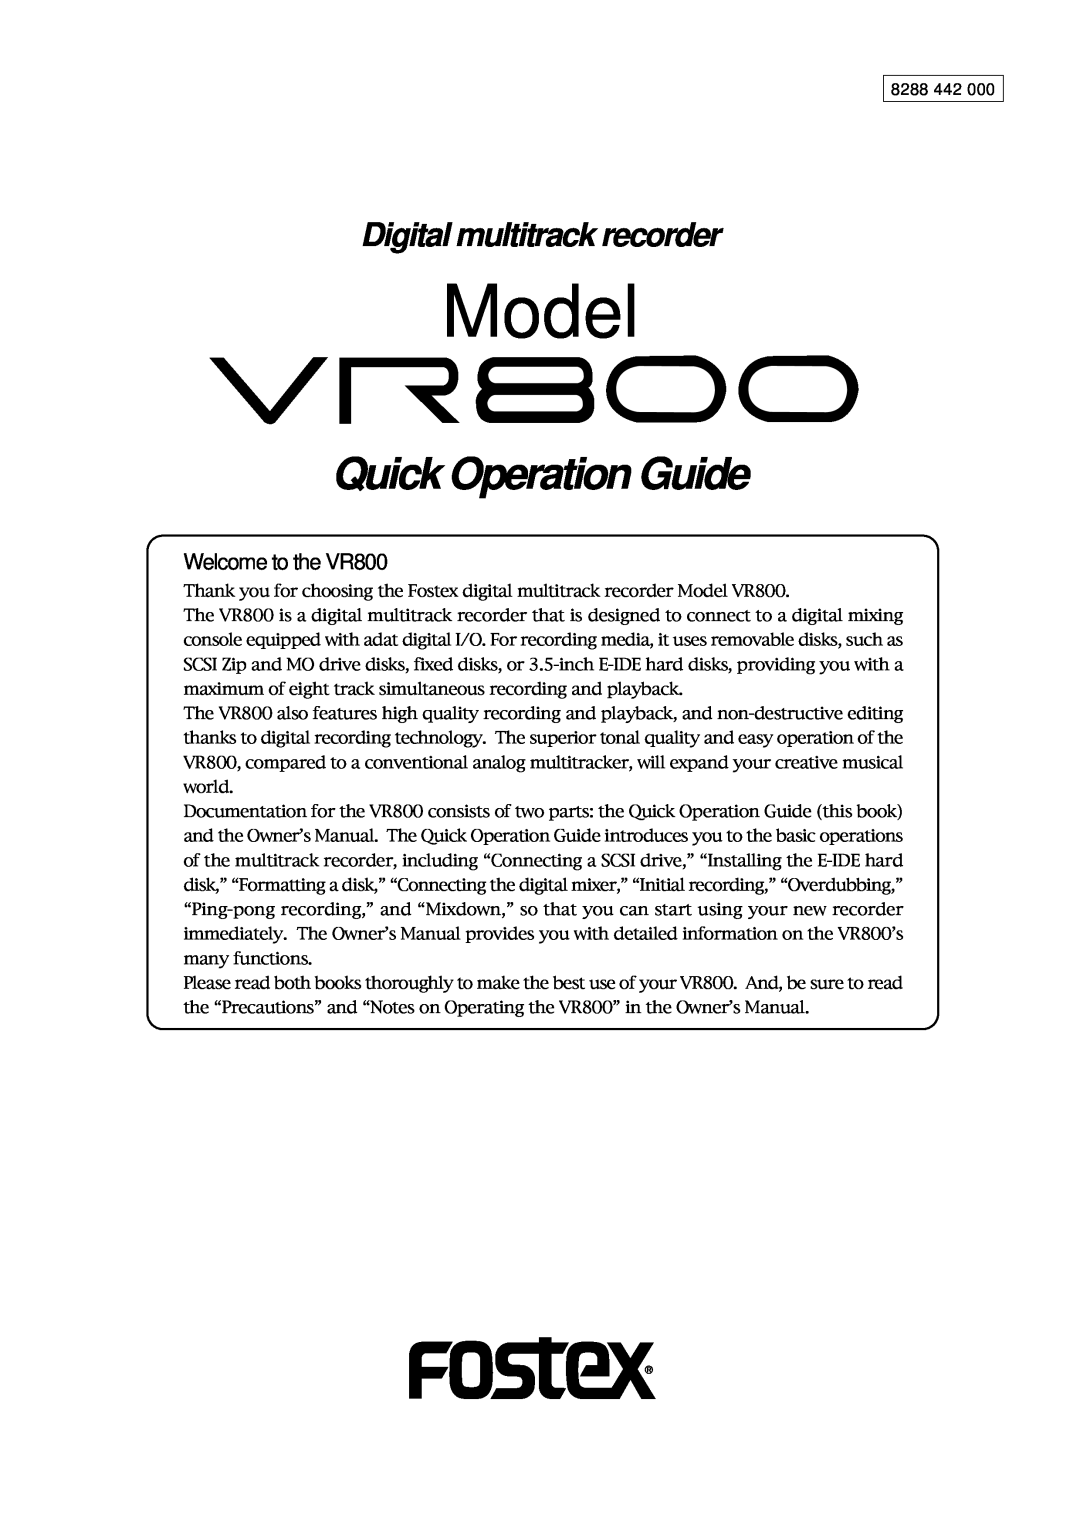 Fostex owner manual Quick Operation Guide, Model, Digital multitrack recorder, Welcome to the VR800 